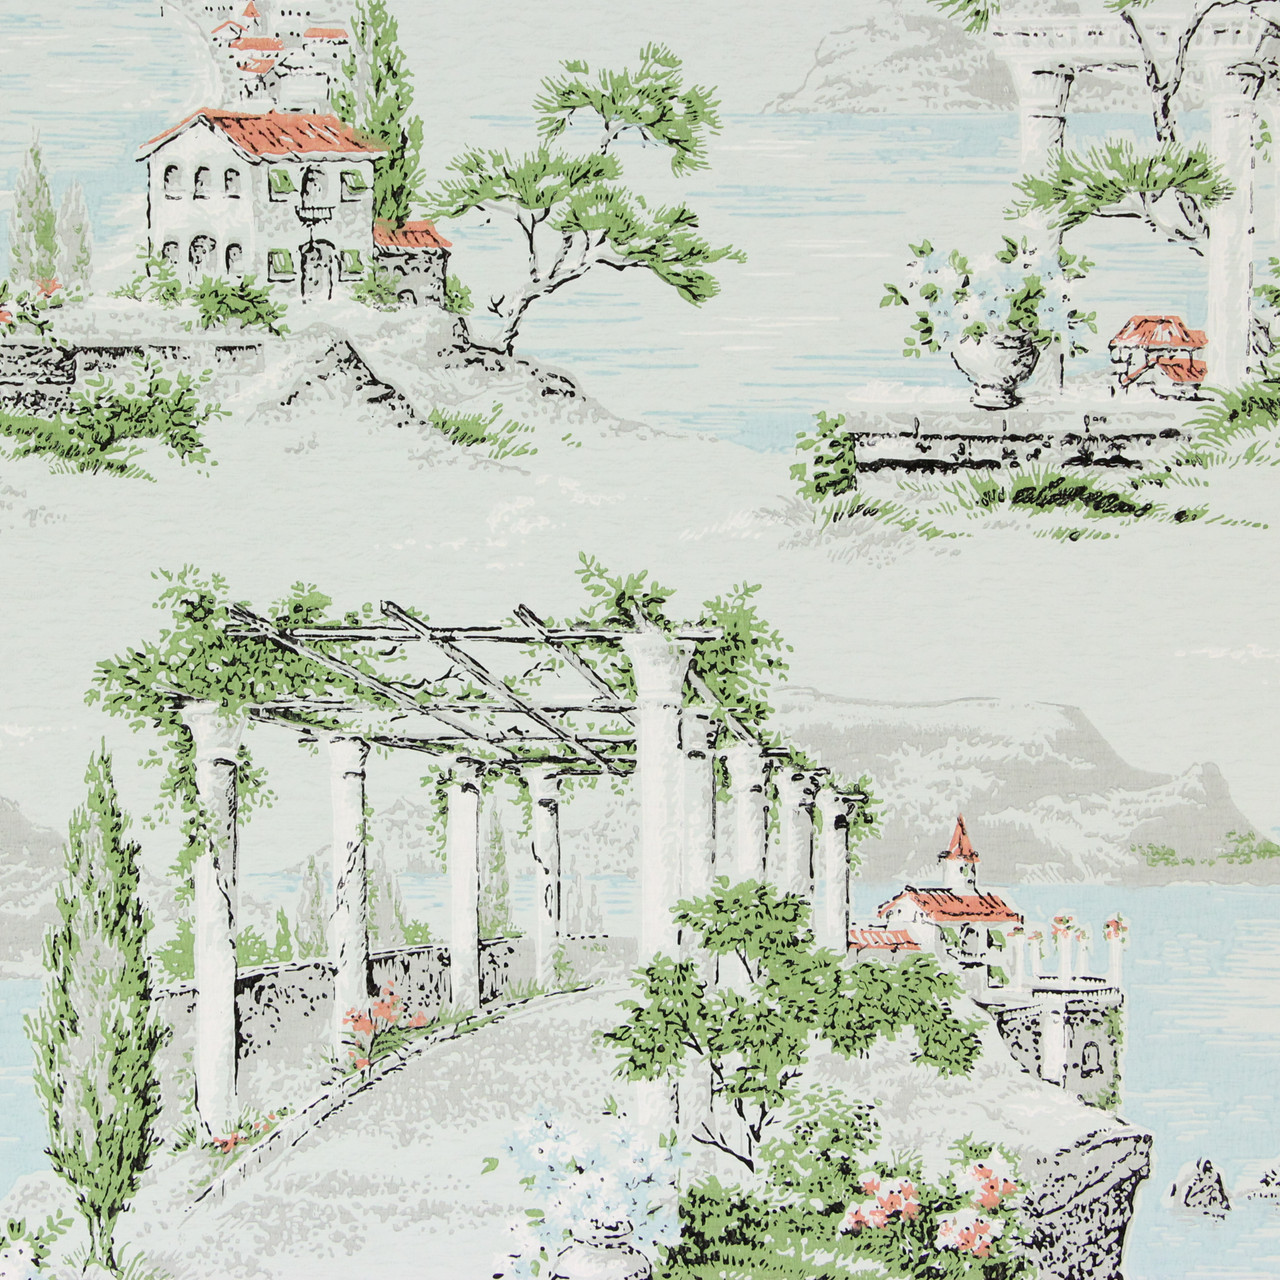 Buy 1950s Vintage Wallpaper Blue Tile Scenic from Online and Save